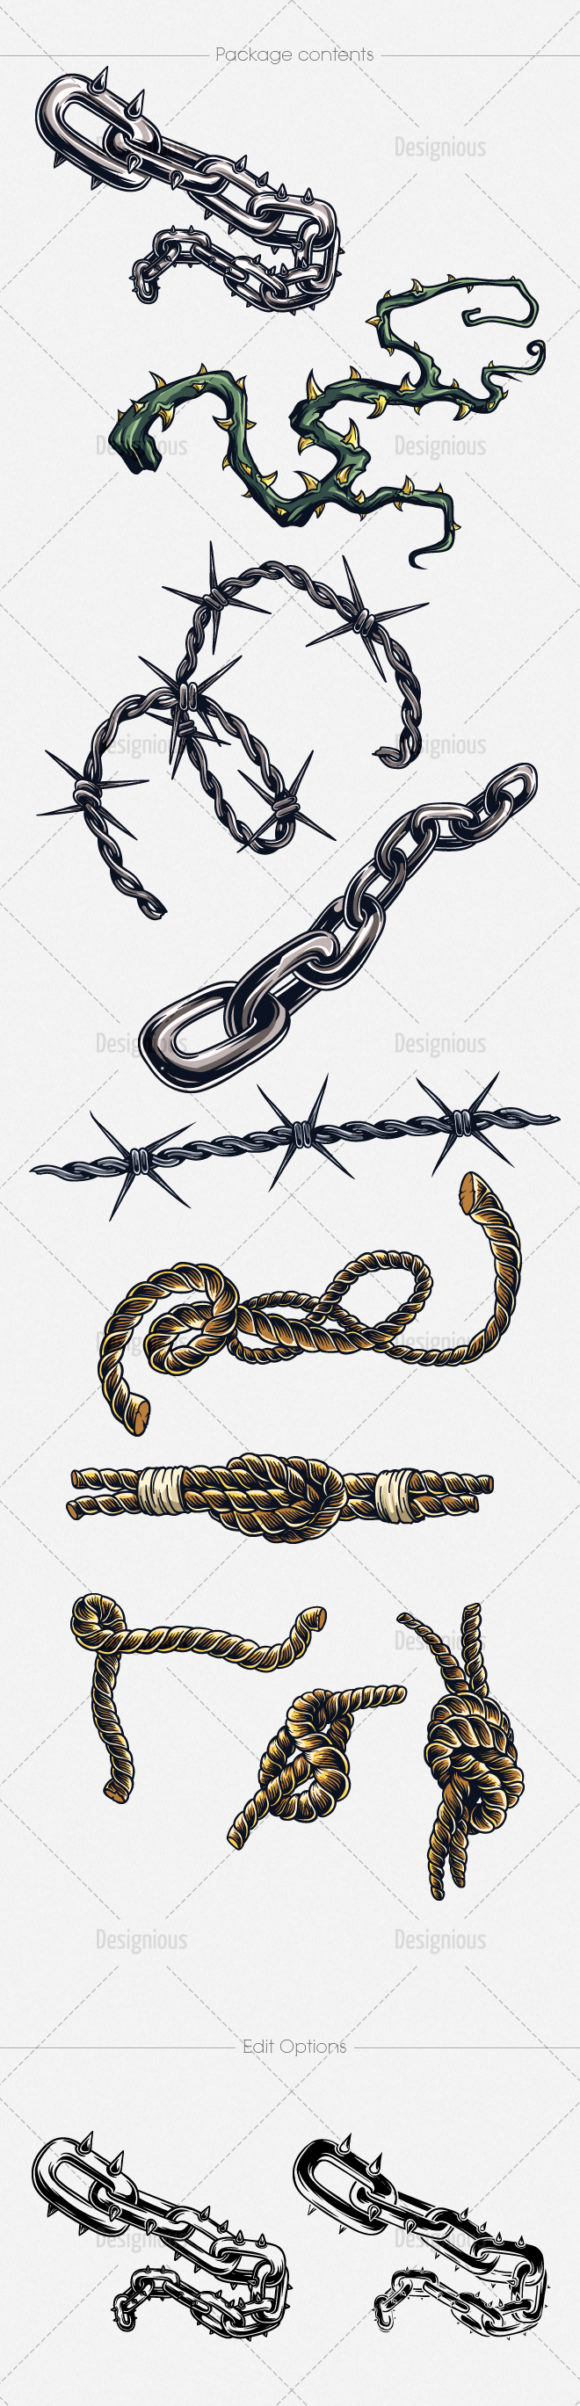 Shackled Vector Pack 1 2